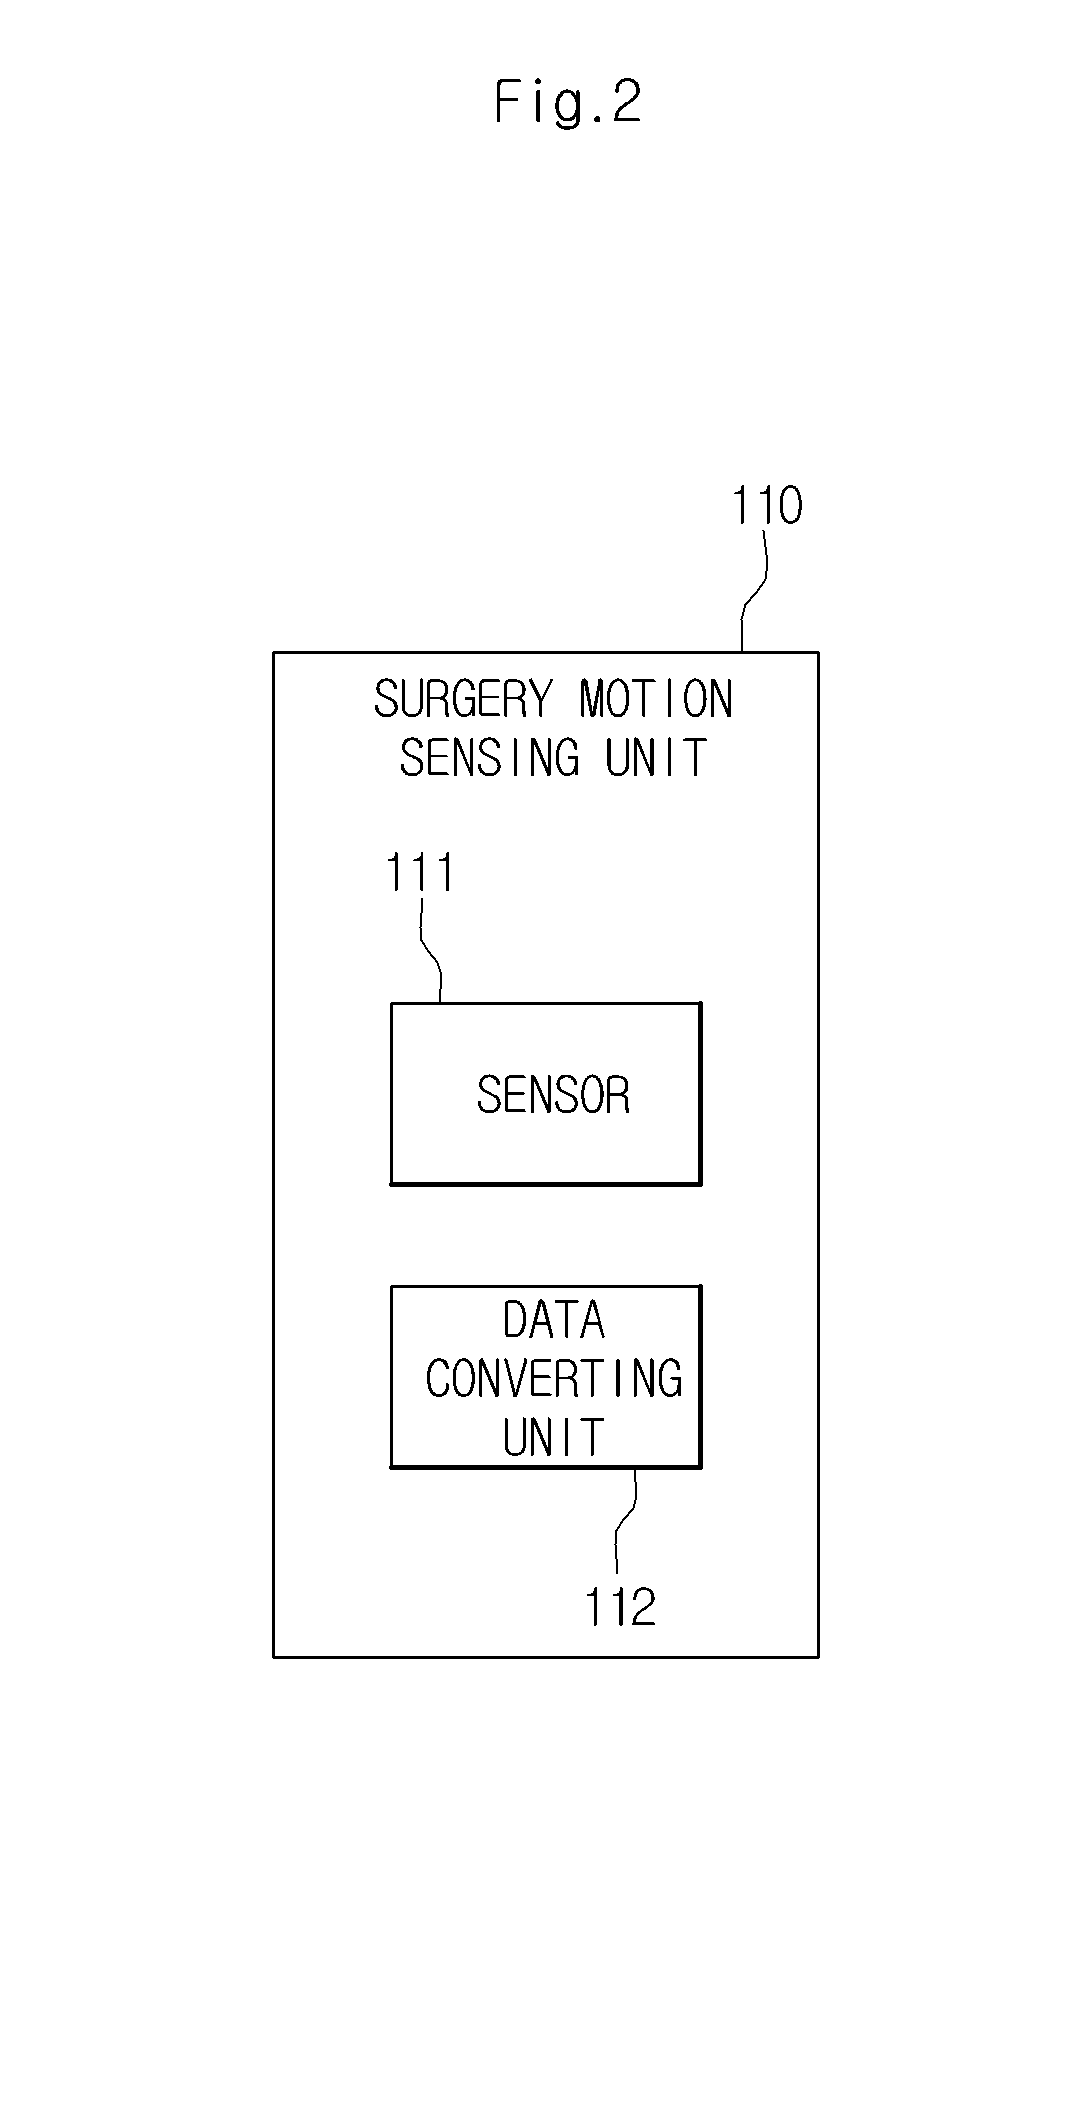 System and method for predicting surgery progress stage